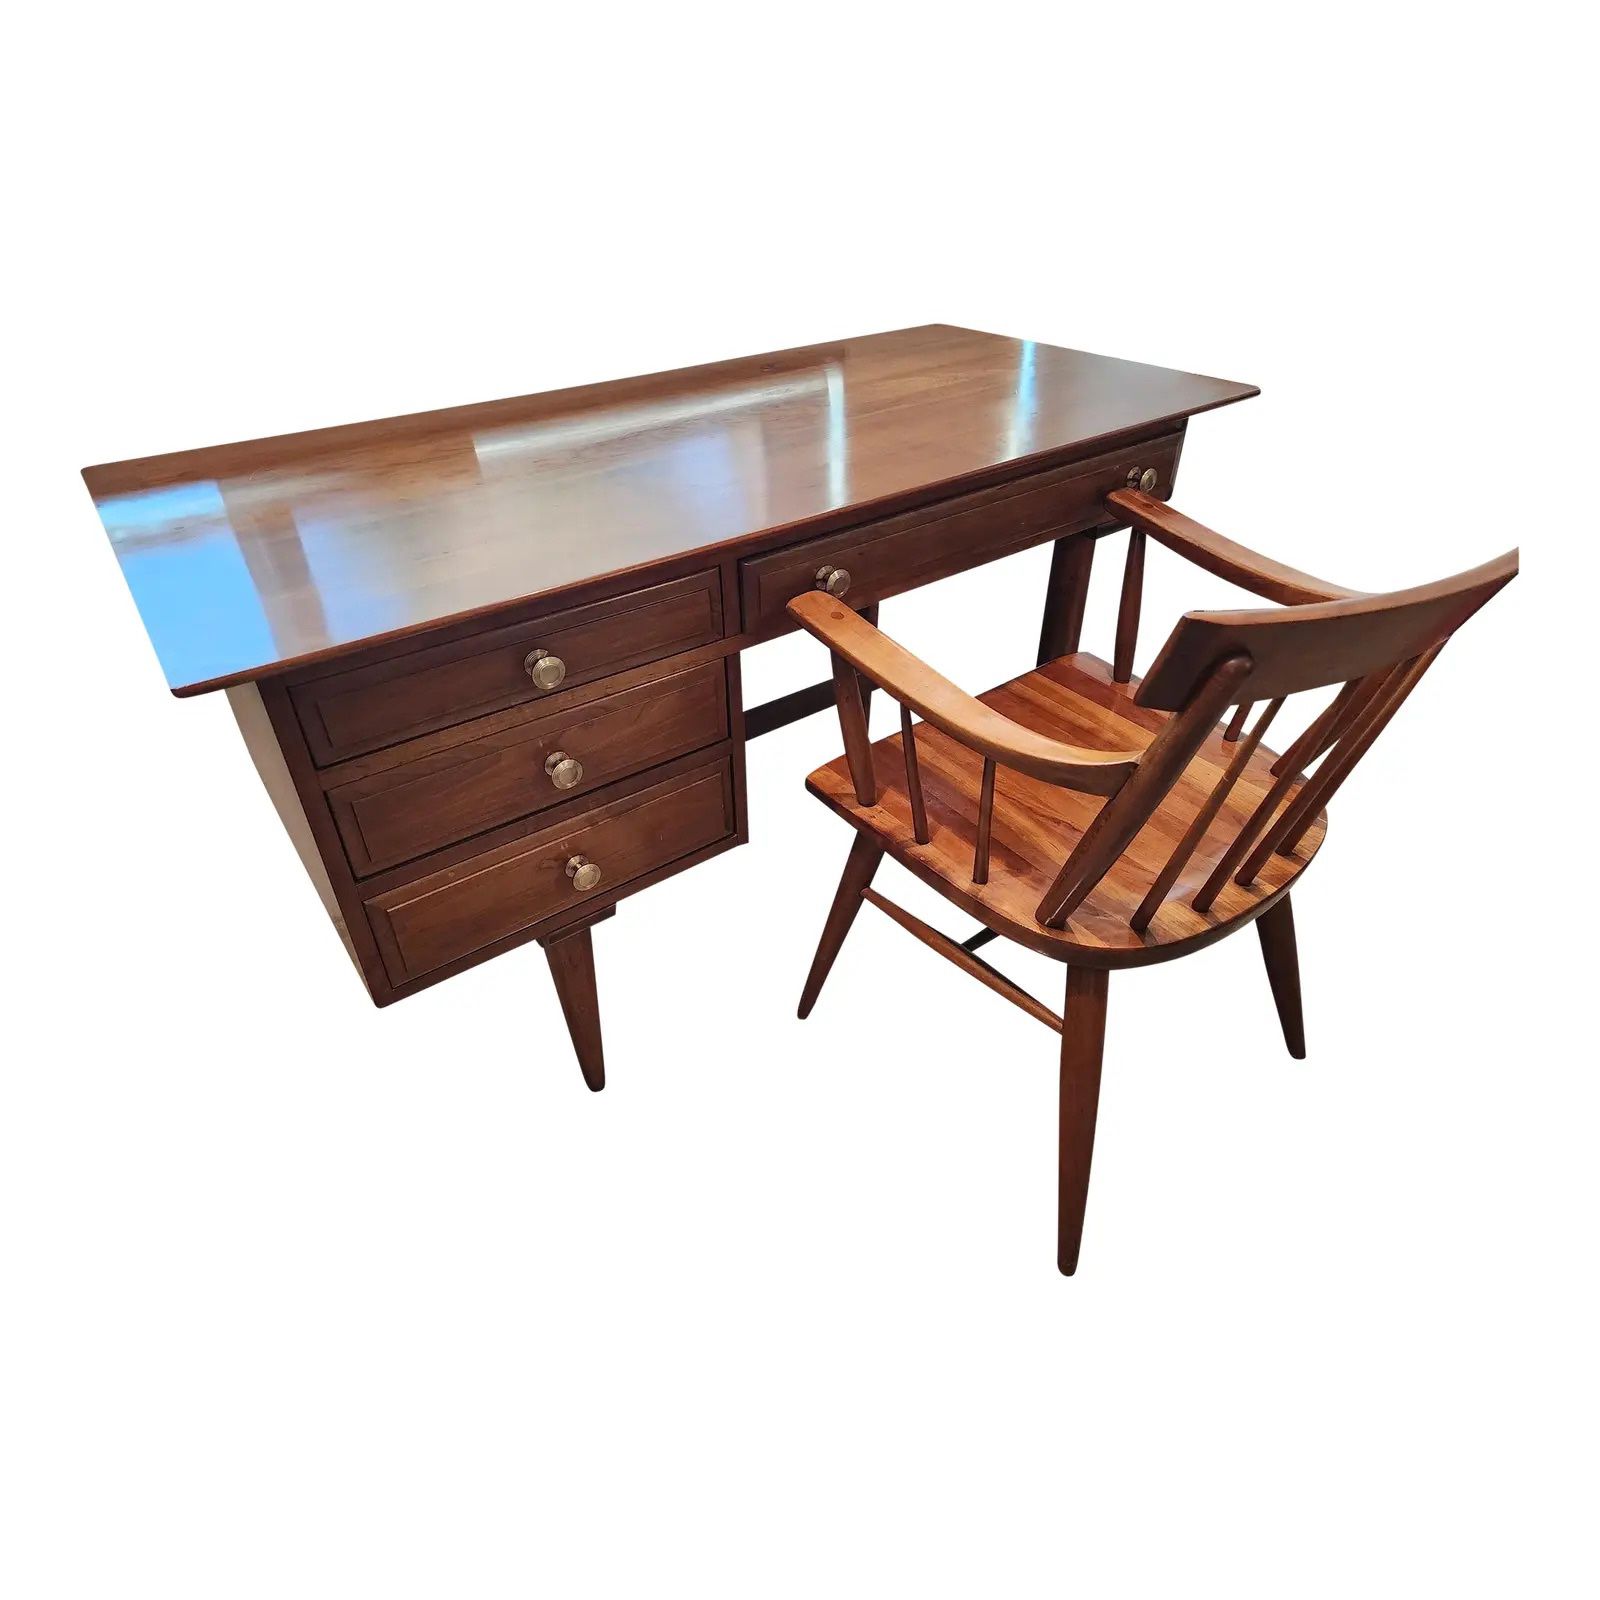 Solid Cherry Desk And Spindle Chair